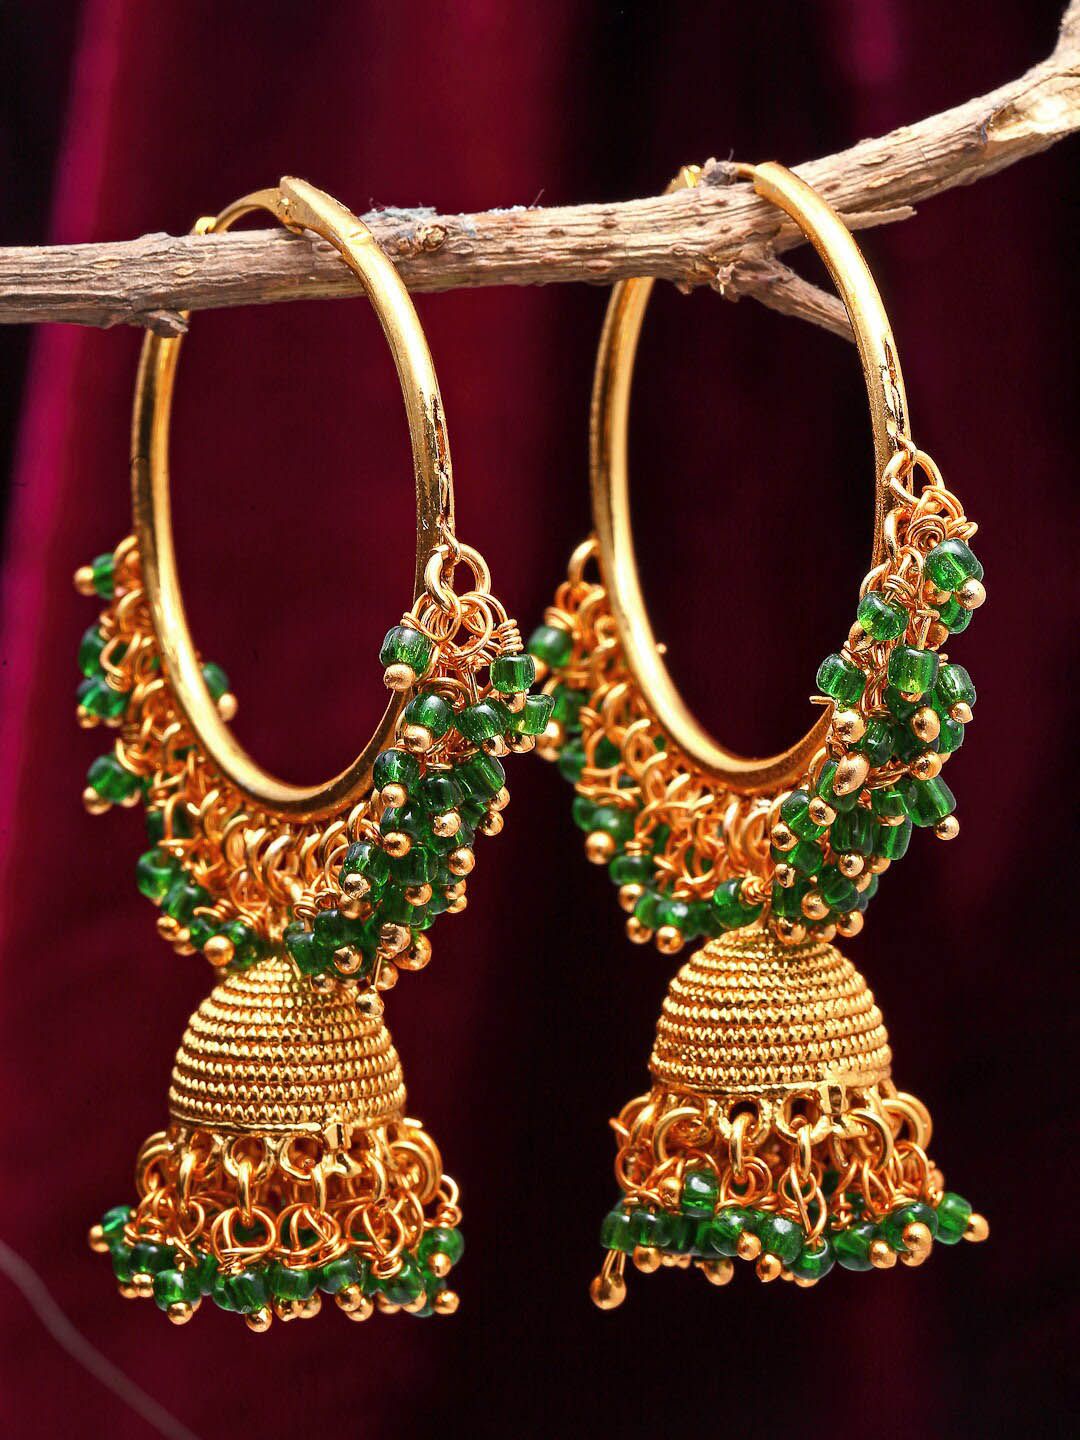 ZENEME Gold-Toned & Green Dome Shaped Jhumkas Earrings Price in India